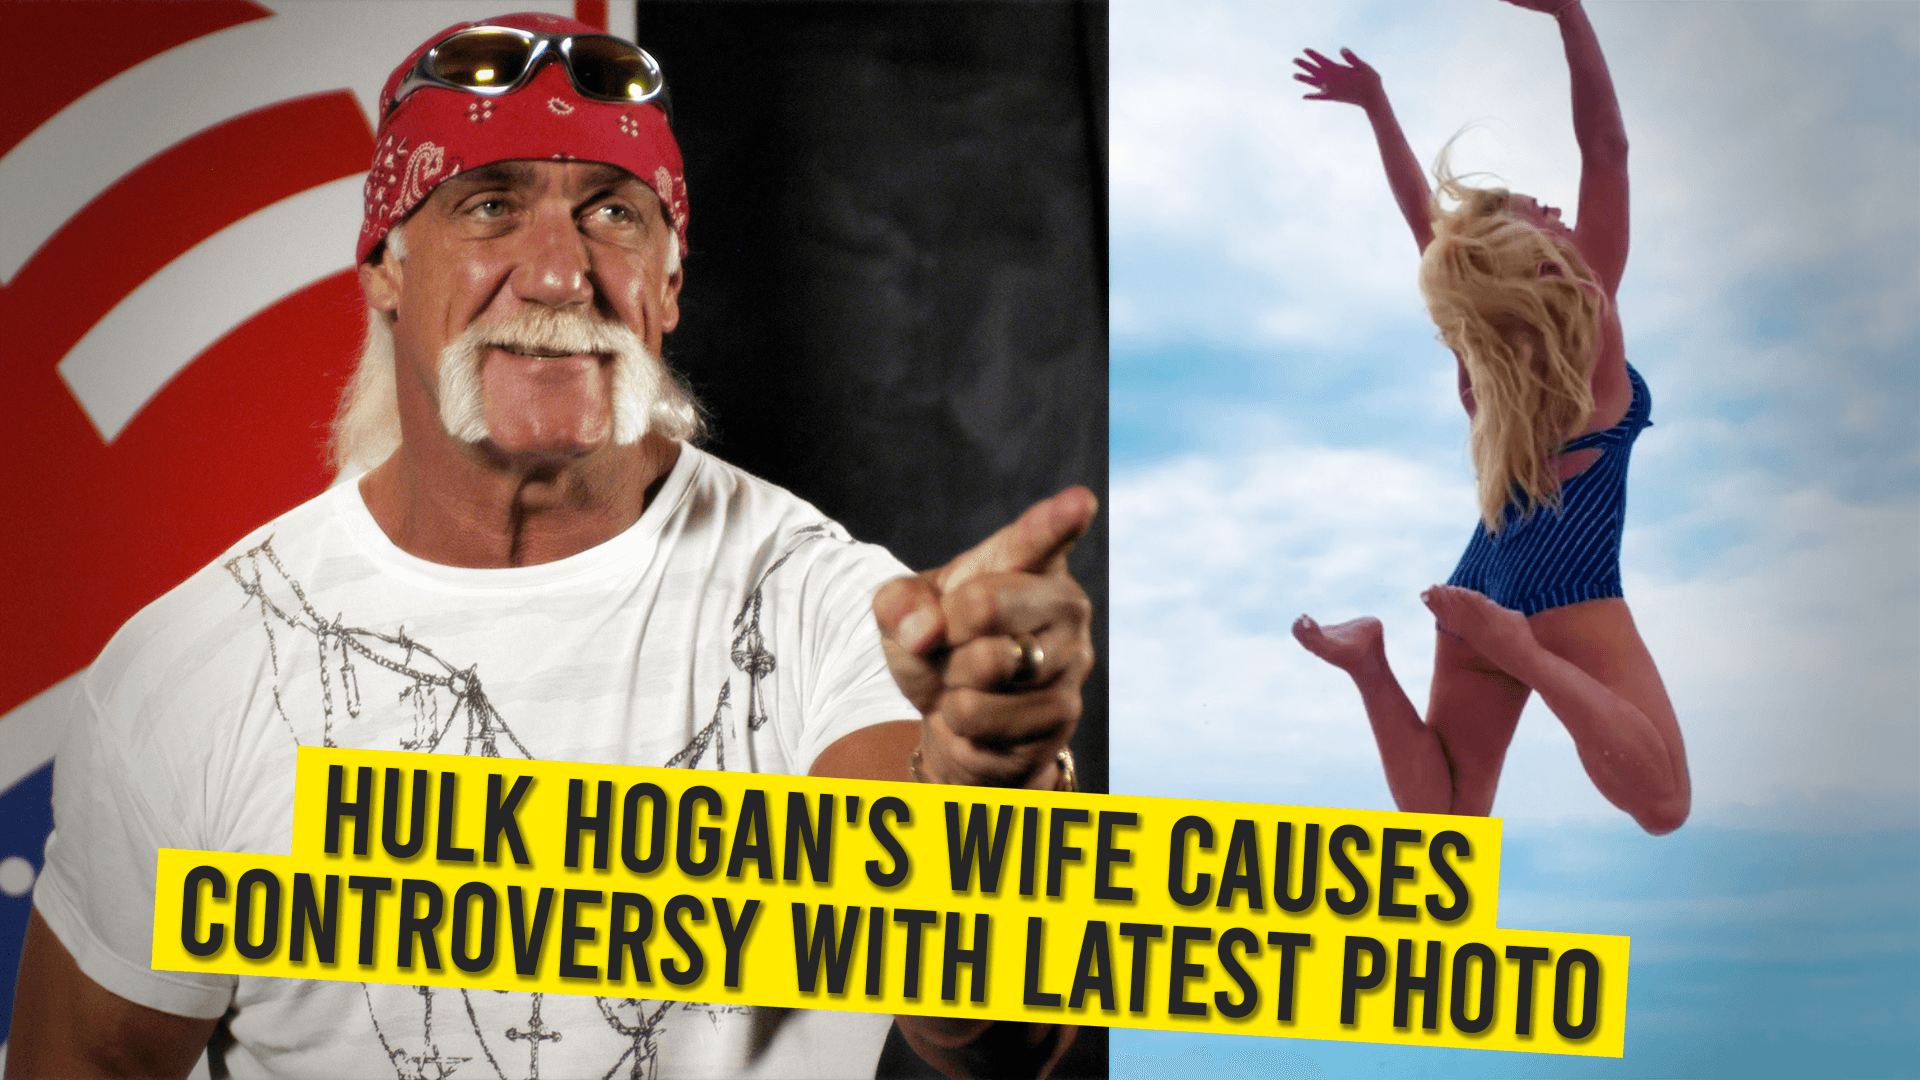 Hulk Hogan’s Wife Causes Controversy With Latest Photo